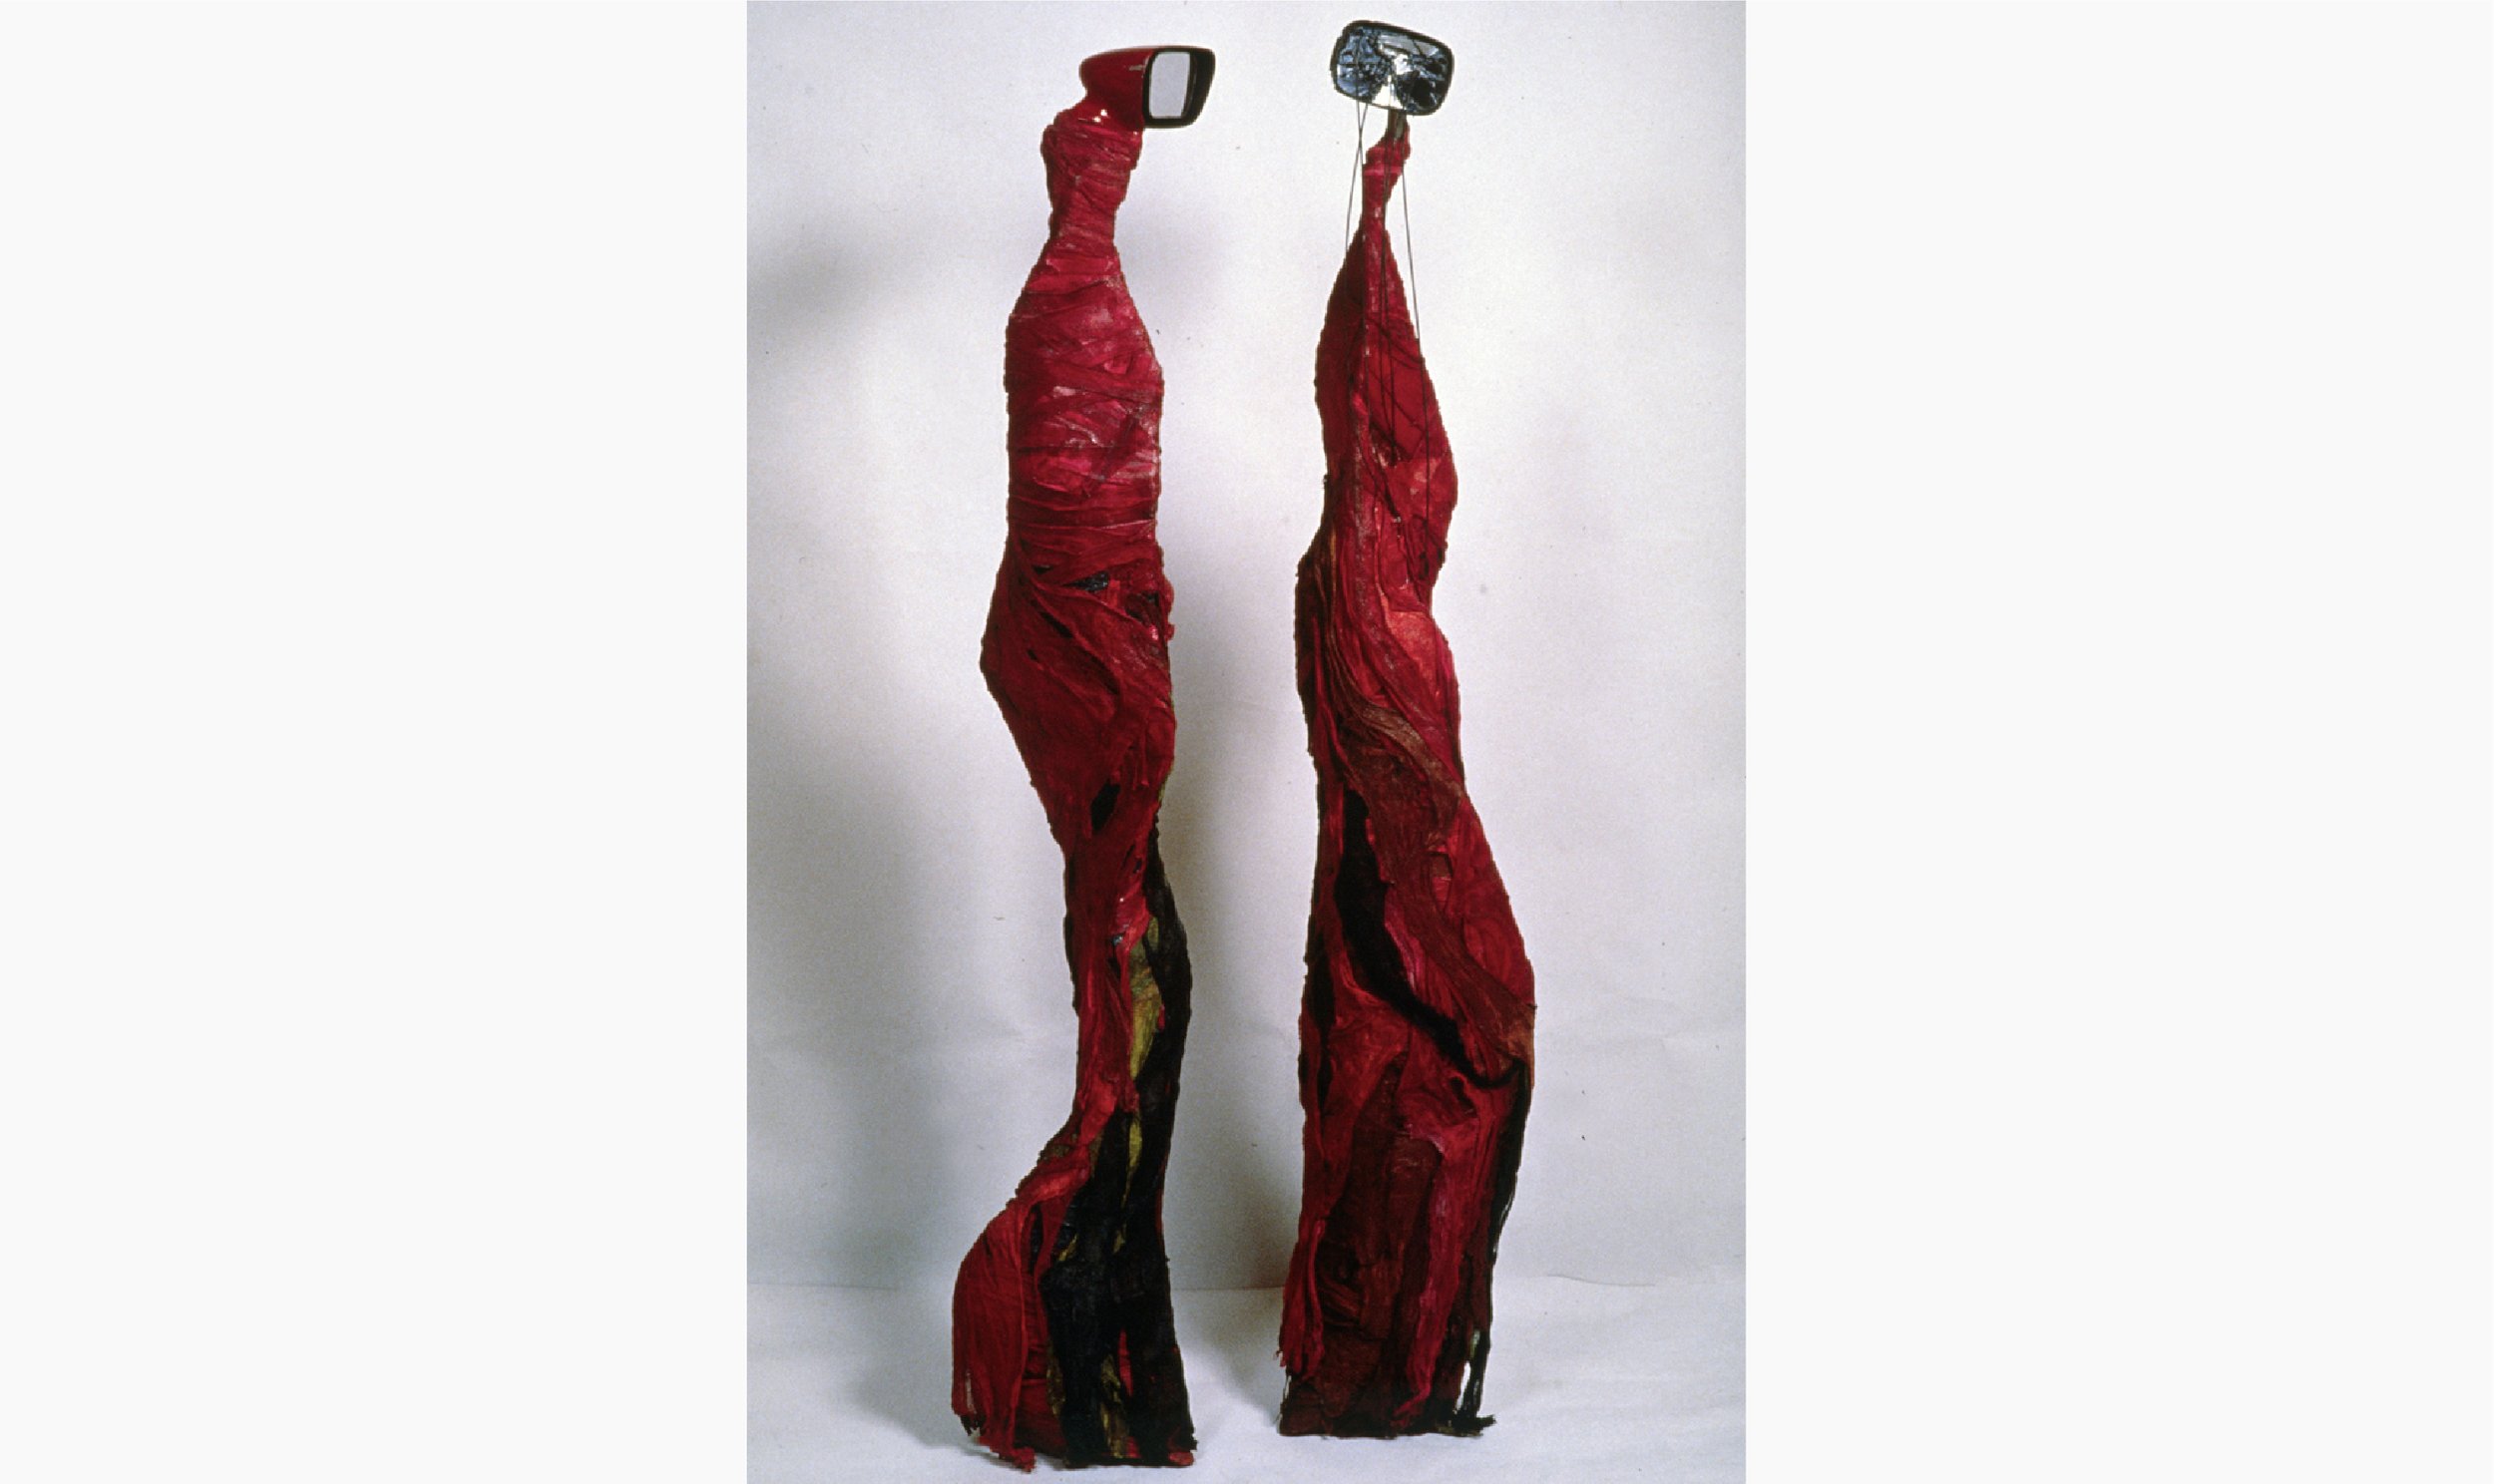  Welded steel frame covered in red dyed fabric dipped in glue, car mirrors 